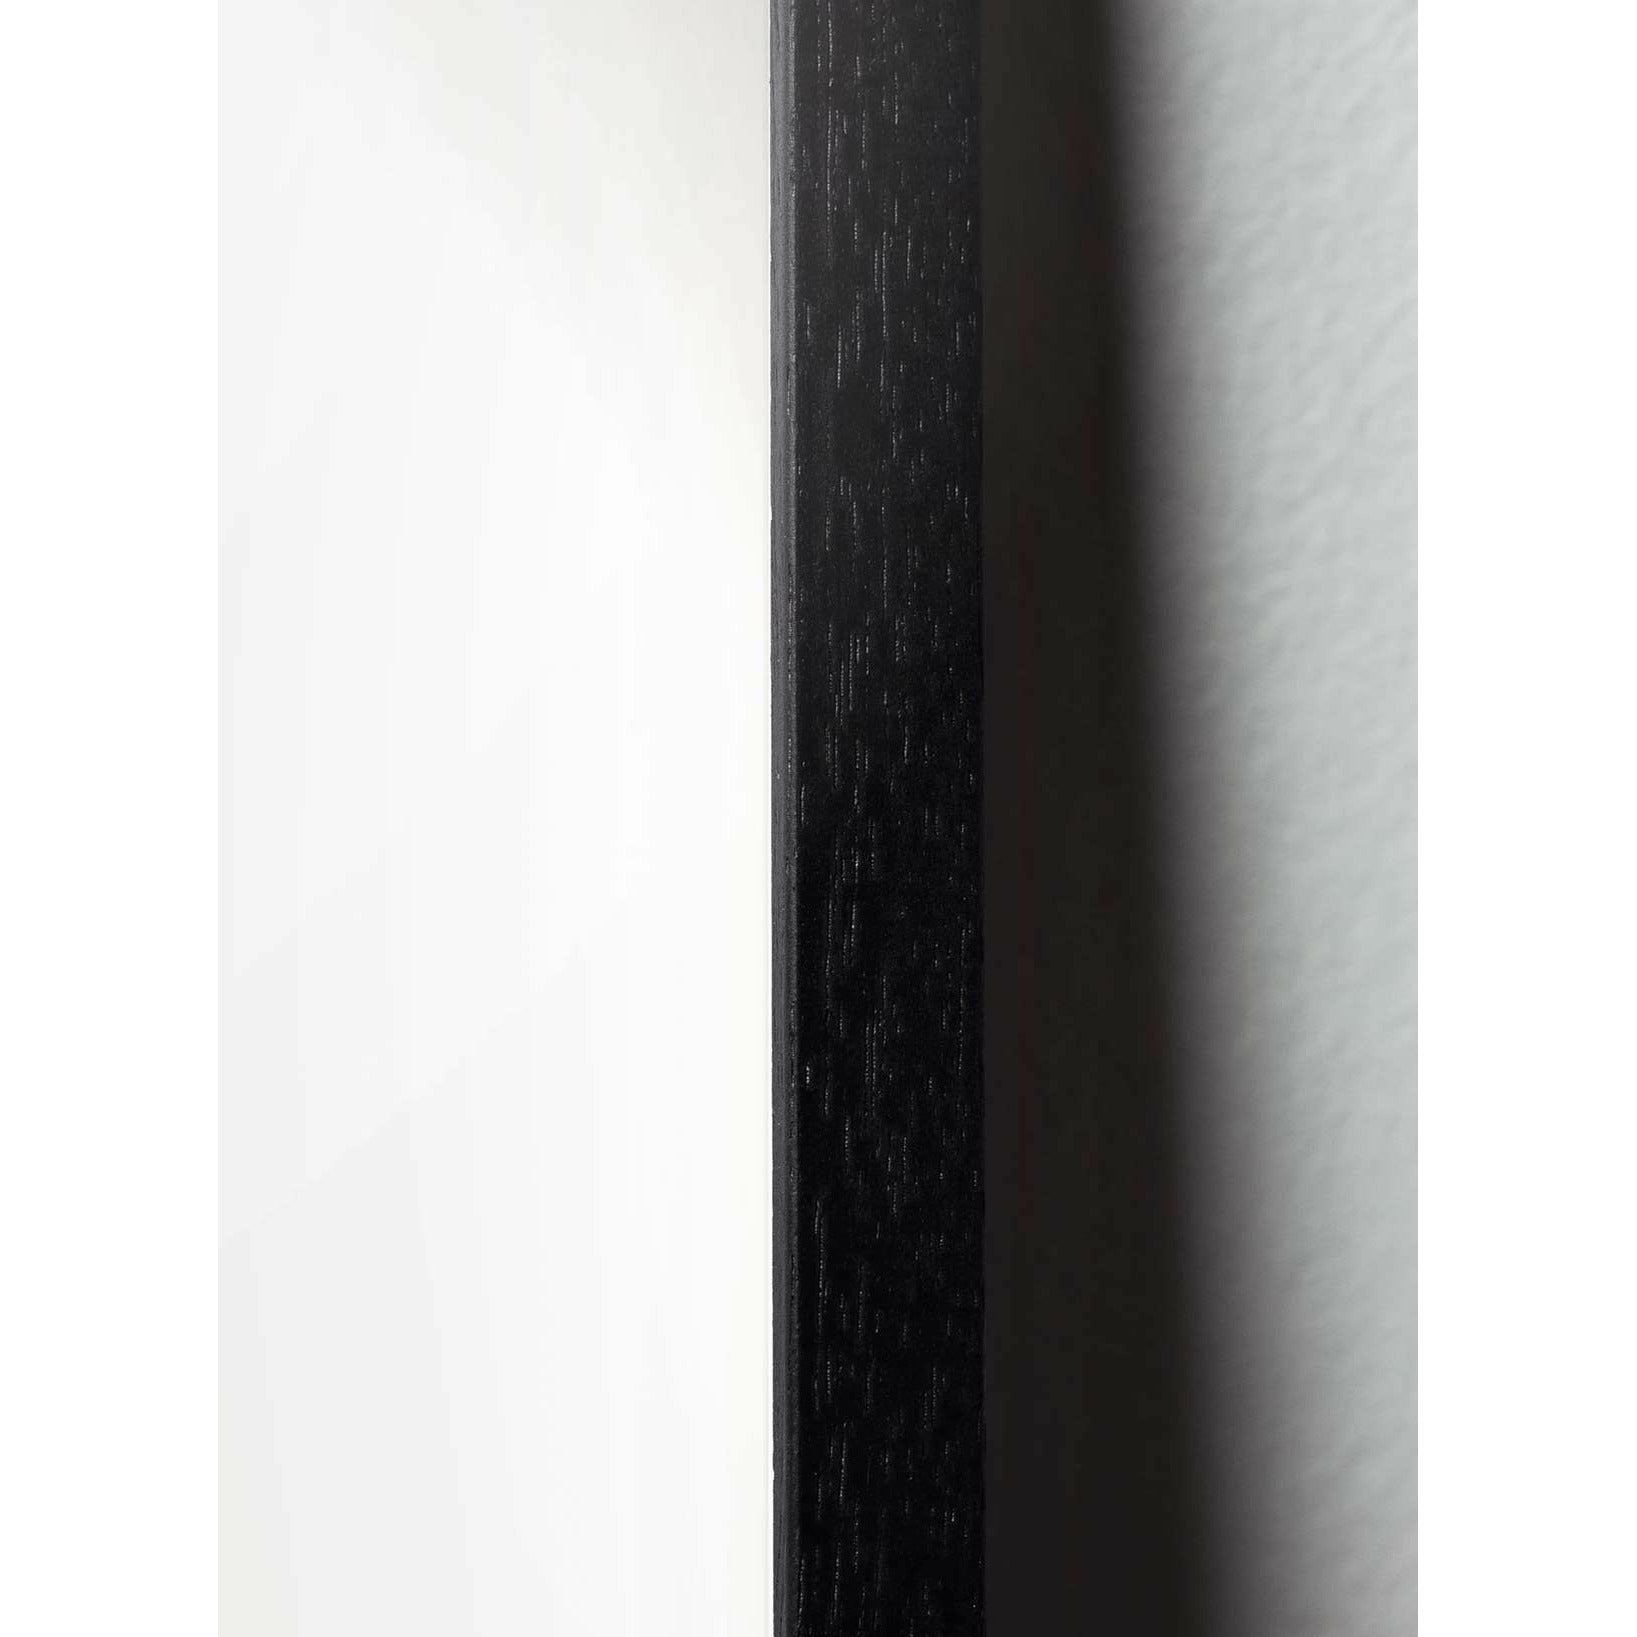 Brainchild Egg Figures Poster, Frame Made Of Black Lacquered Wood 70 X100 Cm, Brown